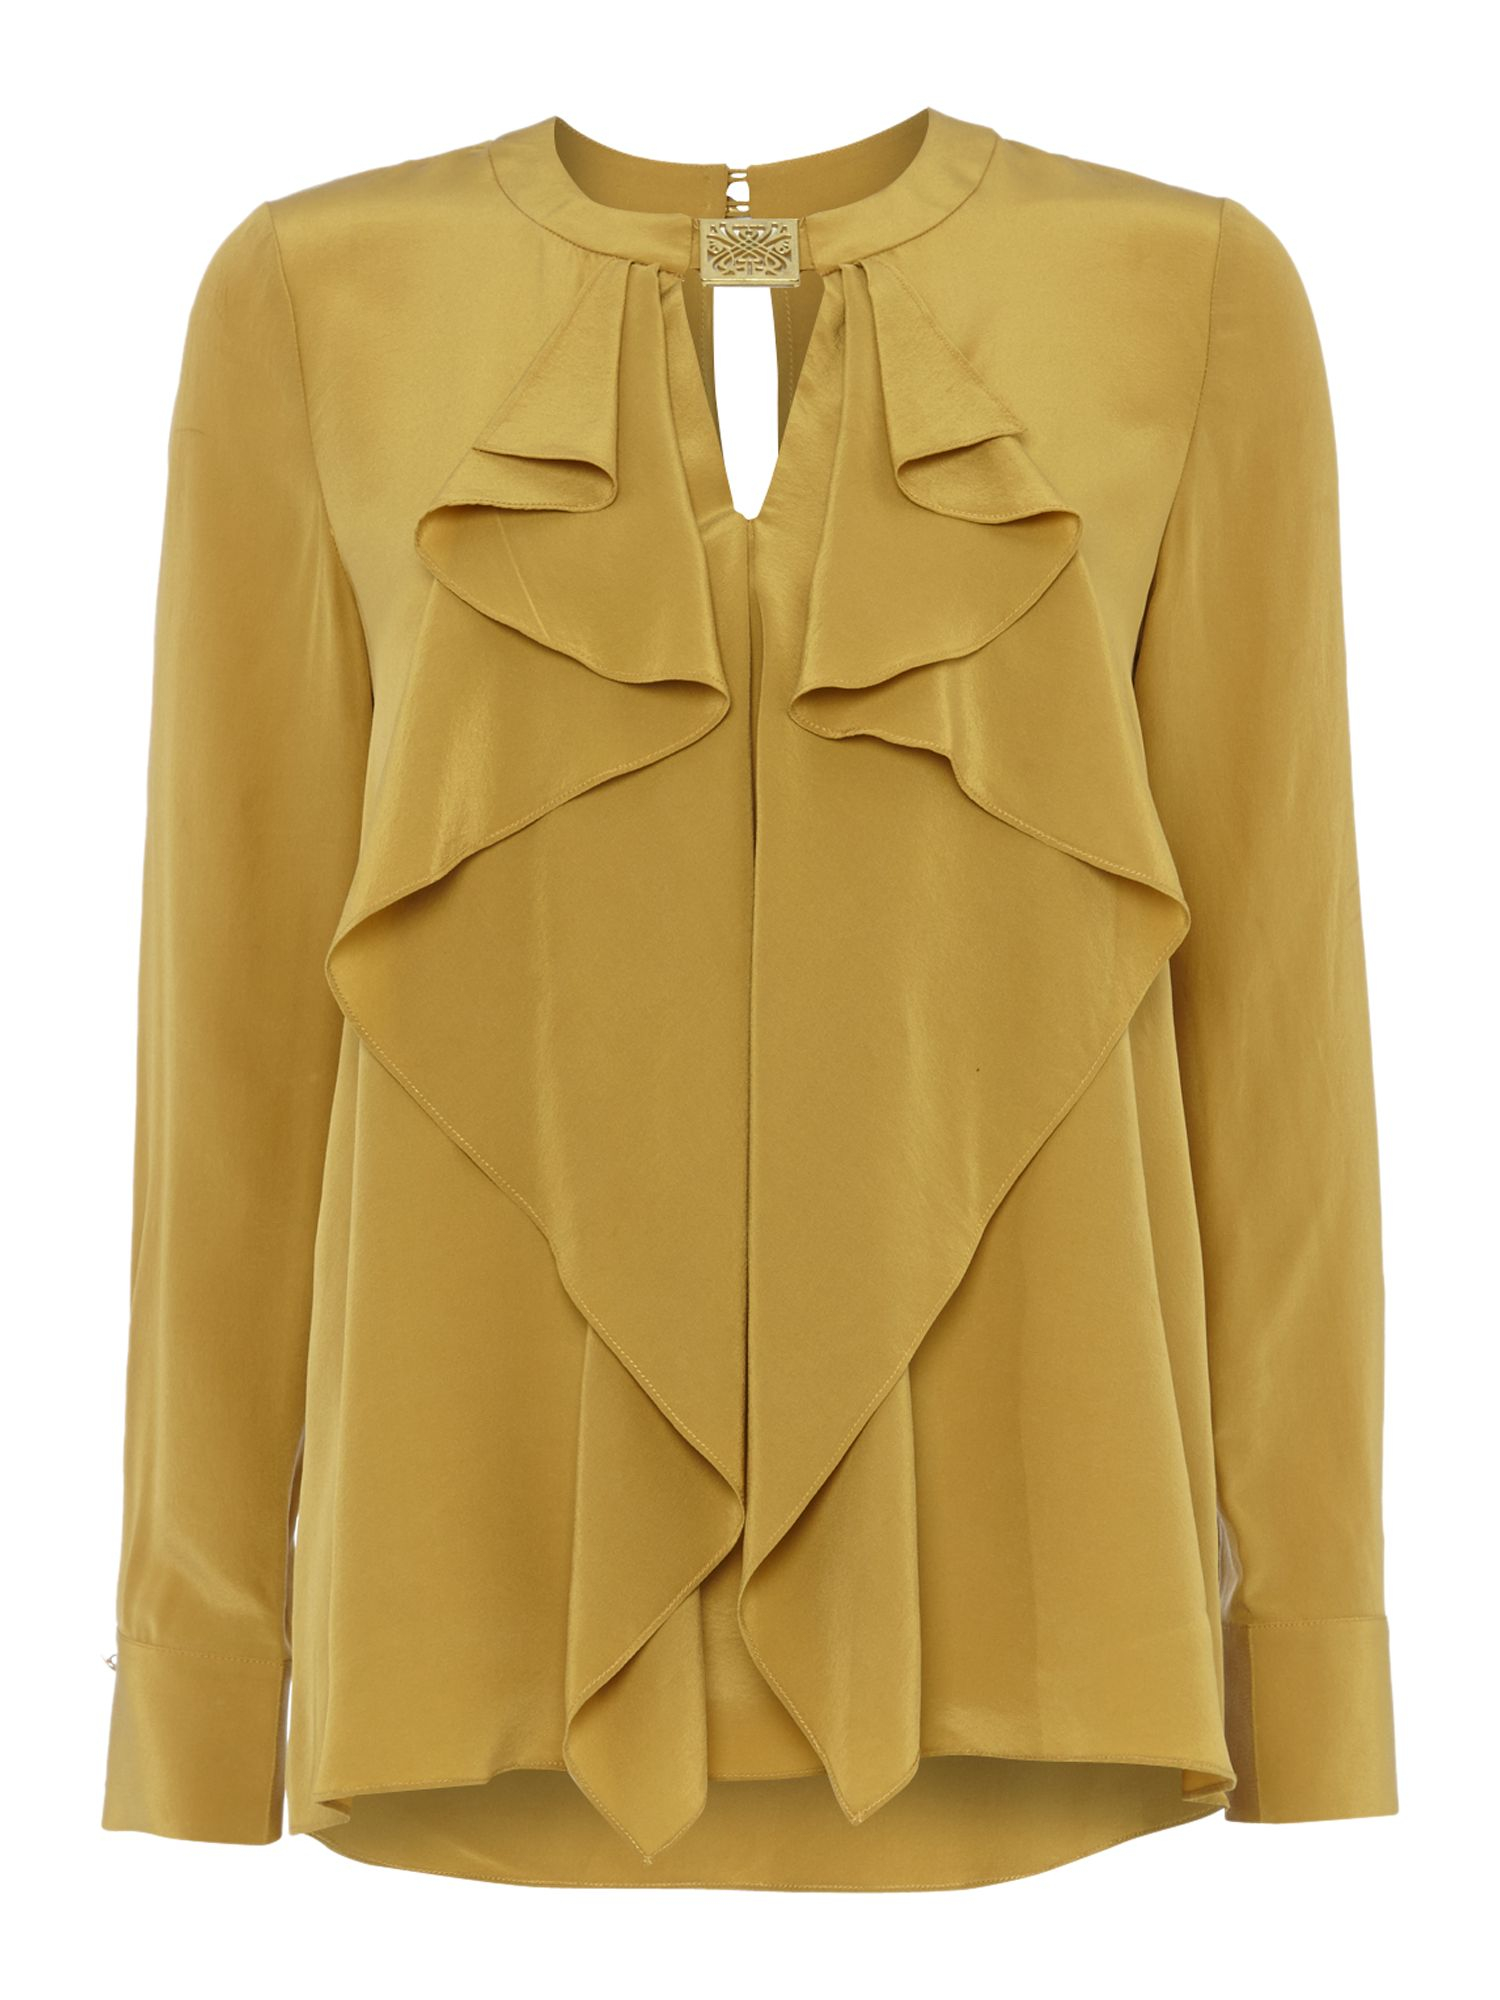 Biba Frill Front Blouse in Yellow (Amber) | Lyst